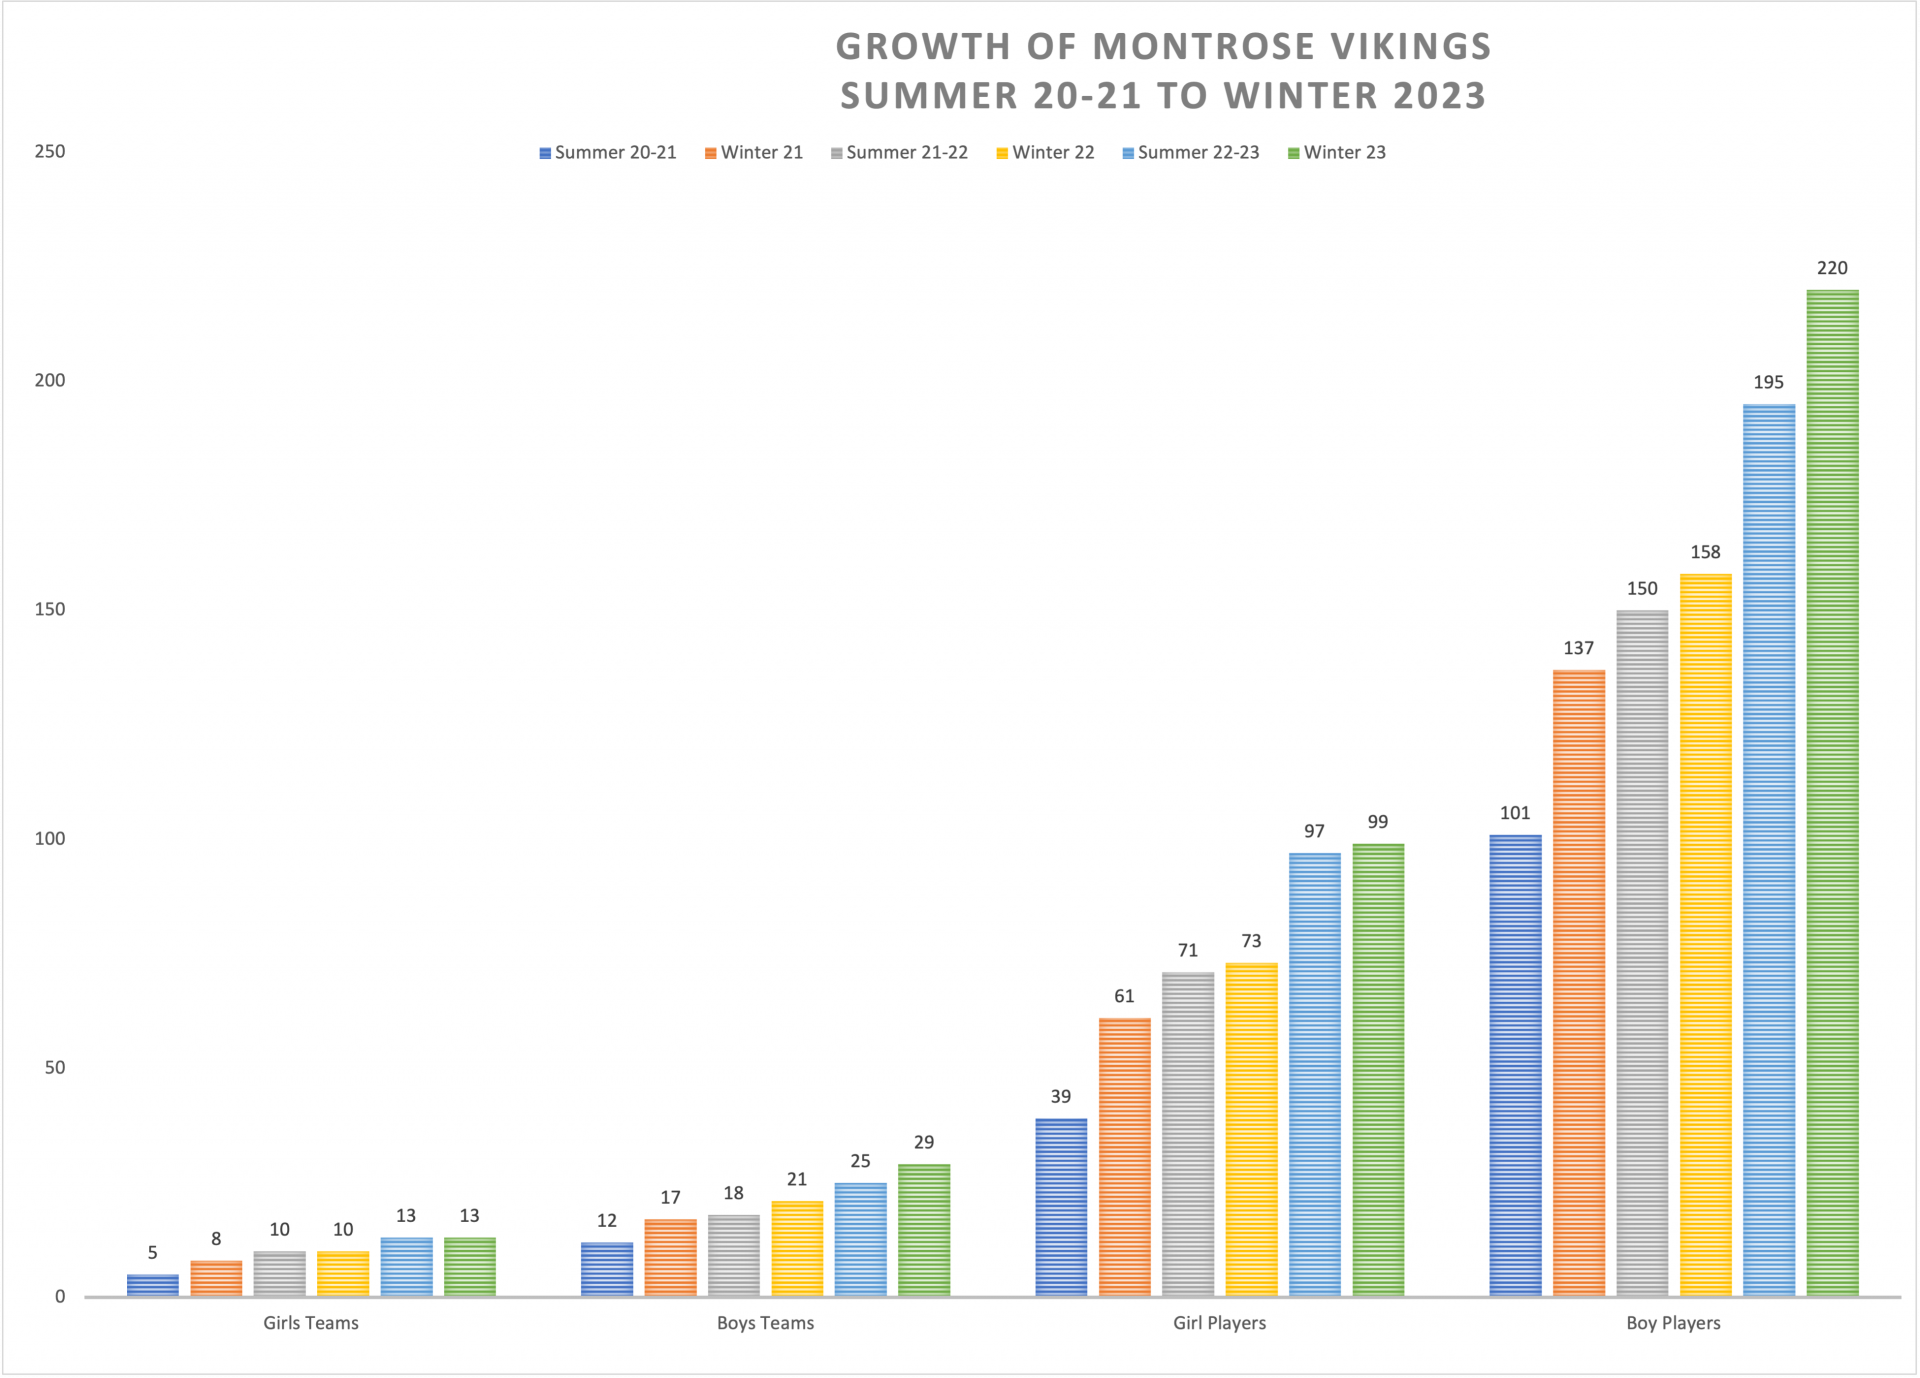 Participation growth chart Montrose Vikings for the past 6 seasons